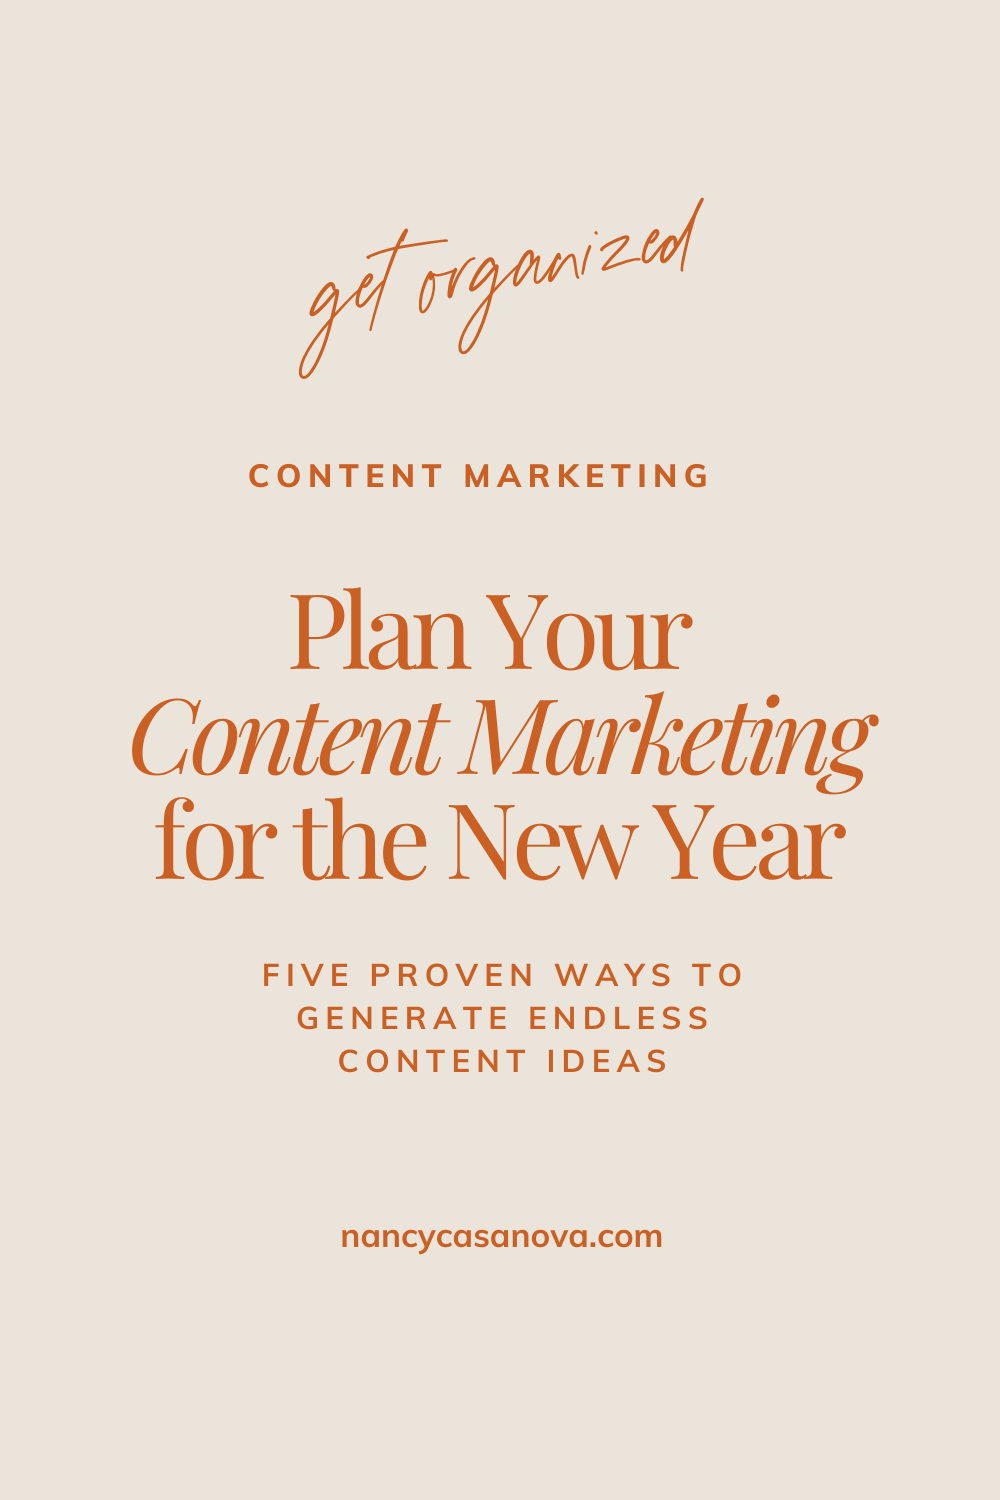 Time to reflect, review and refine your content marketing.